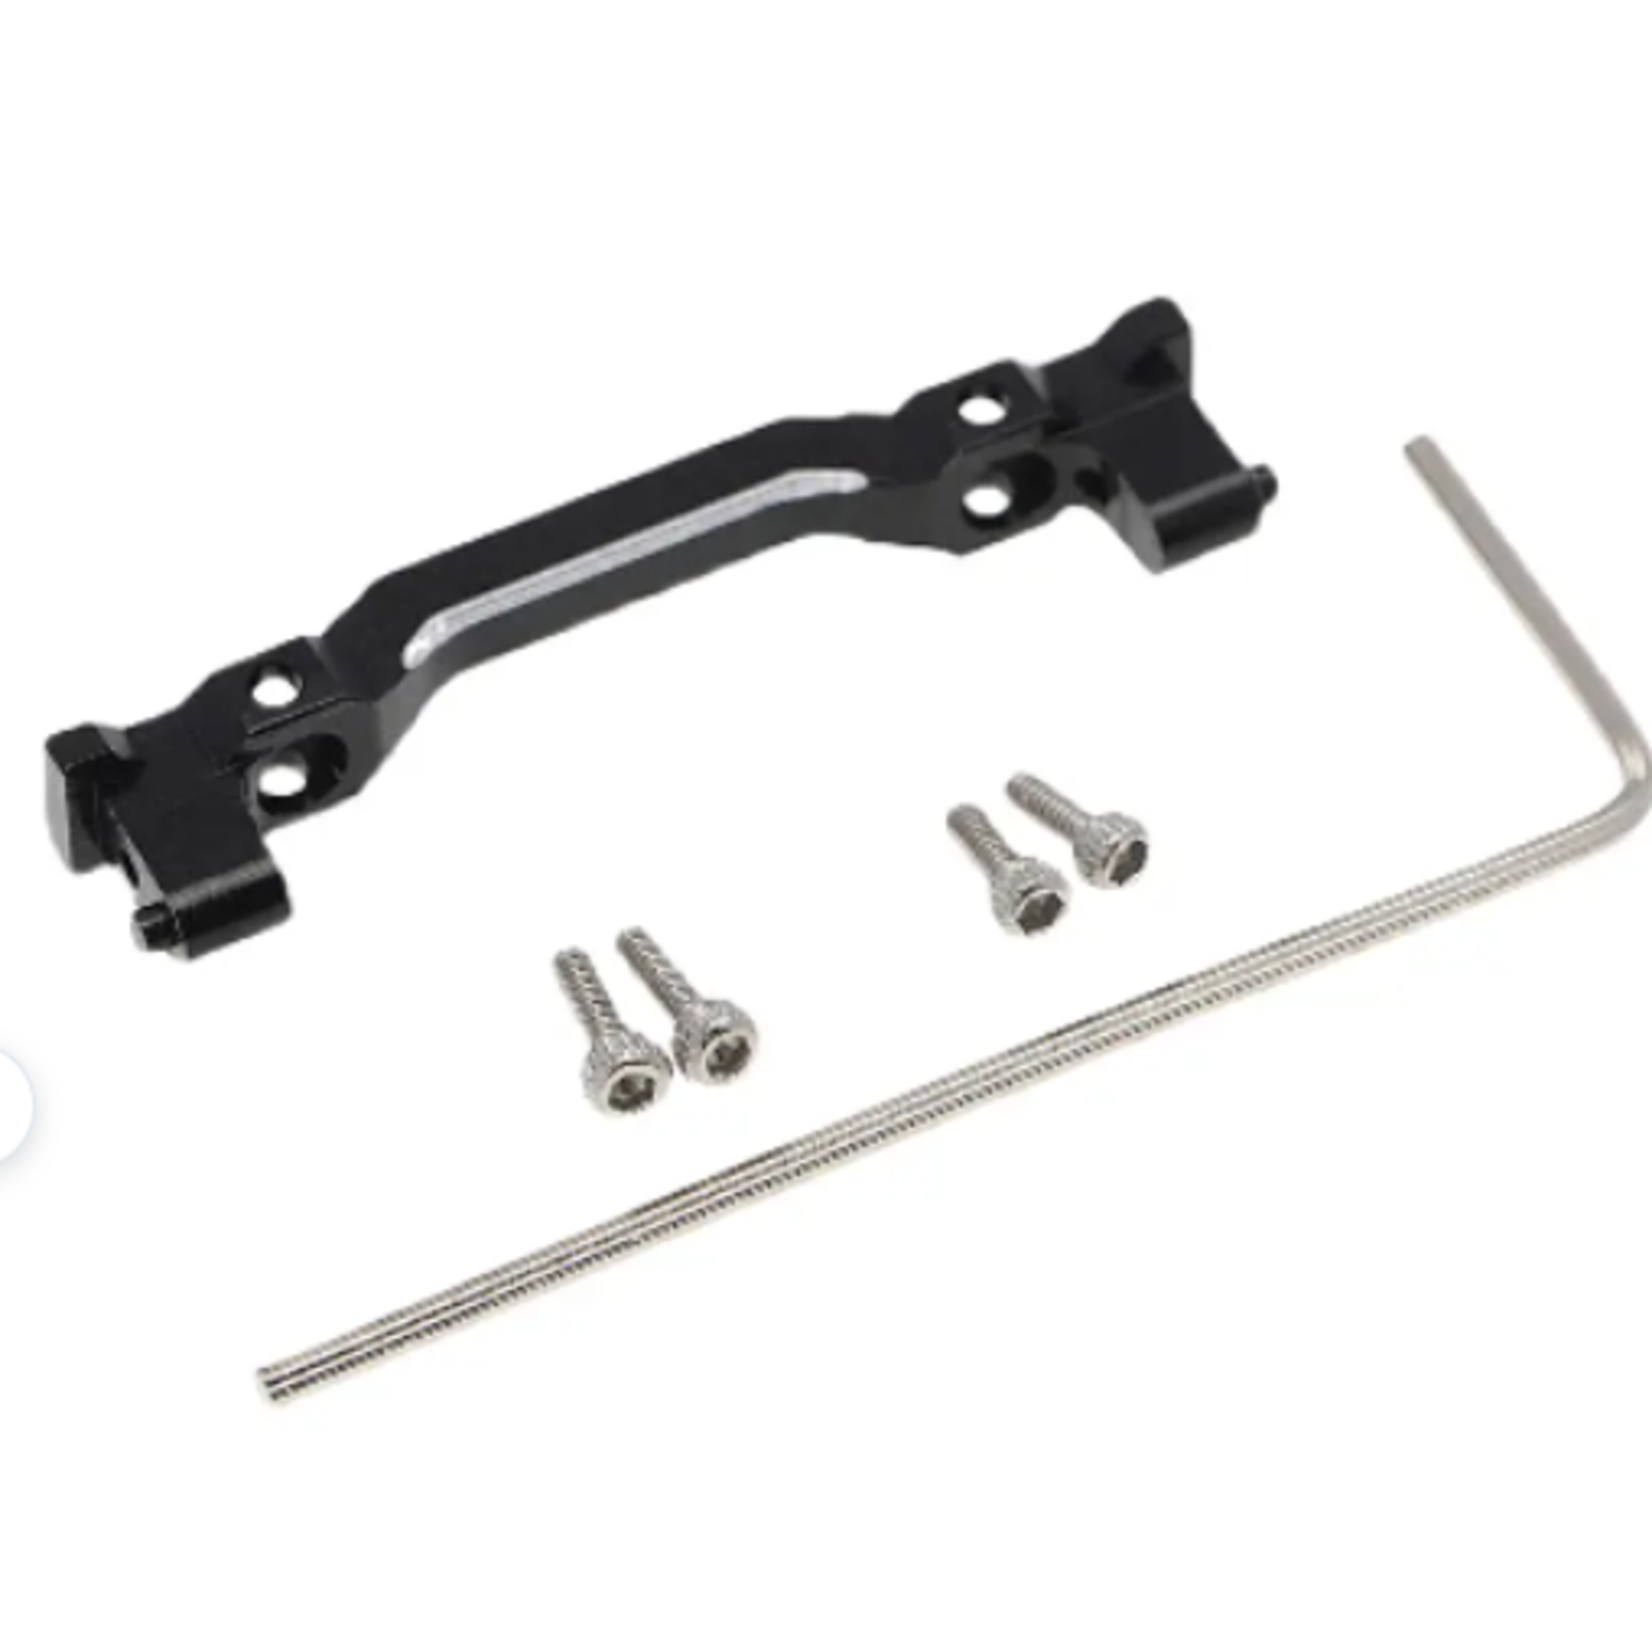 INTEGY Alloy Machined Front Bumper Mount for Axial 1/24 SCX24 Rock Crawler